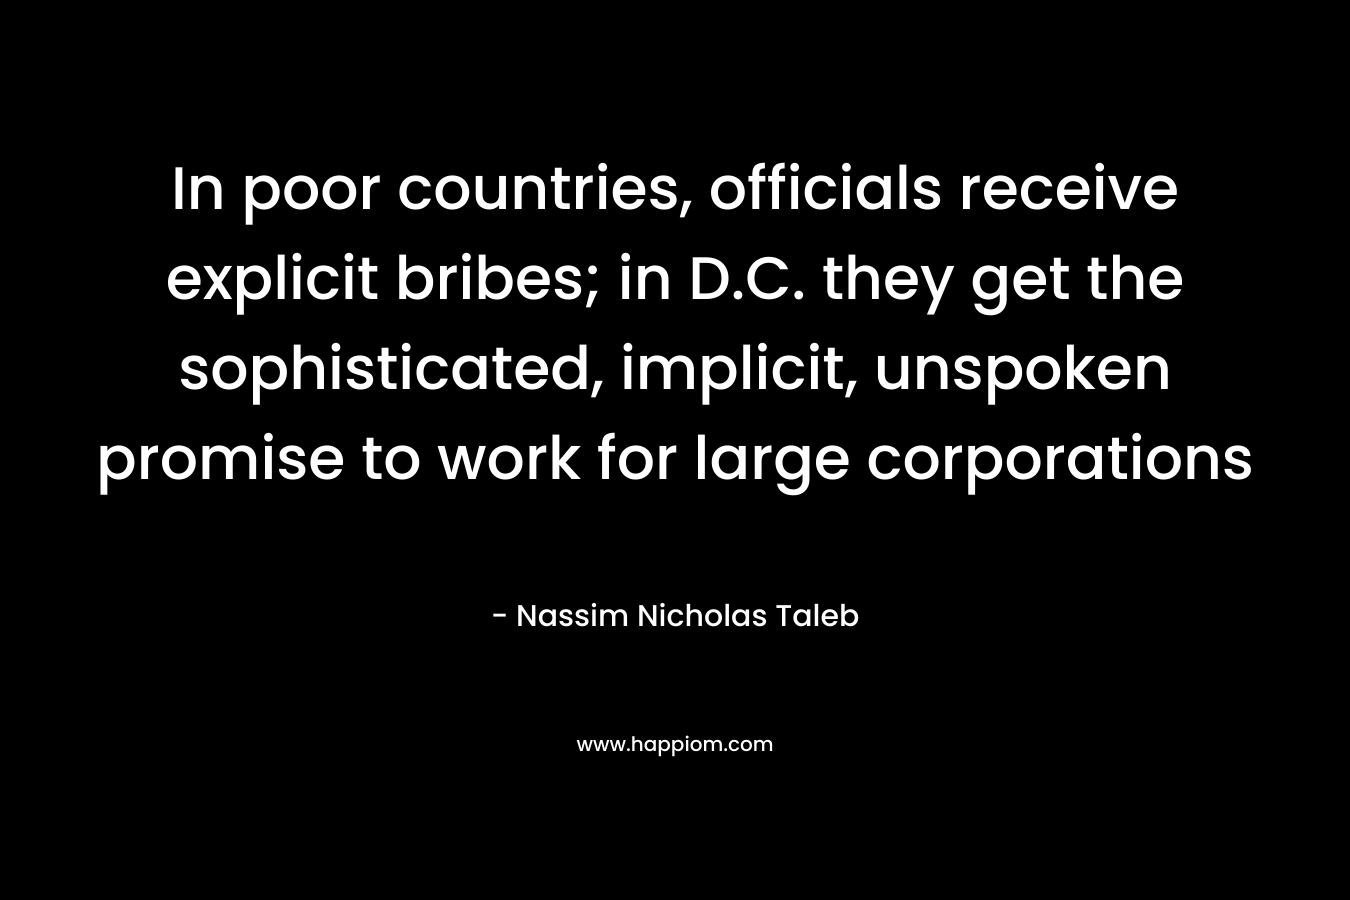 In poor countries, officials receive explicit bribes; in D.C. they get the sophisticated, implicit, unspoken promise to work for large corporations – Nassim Nicholas Taleb